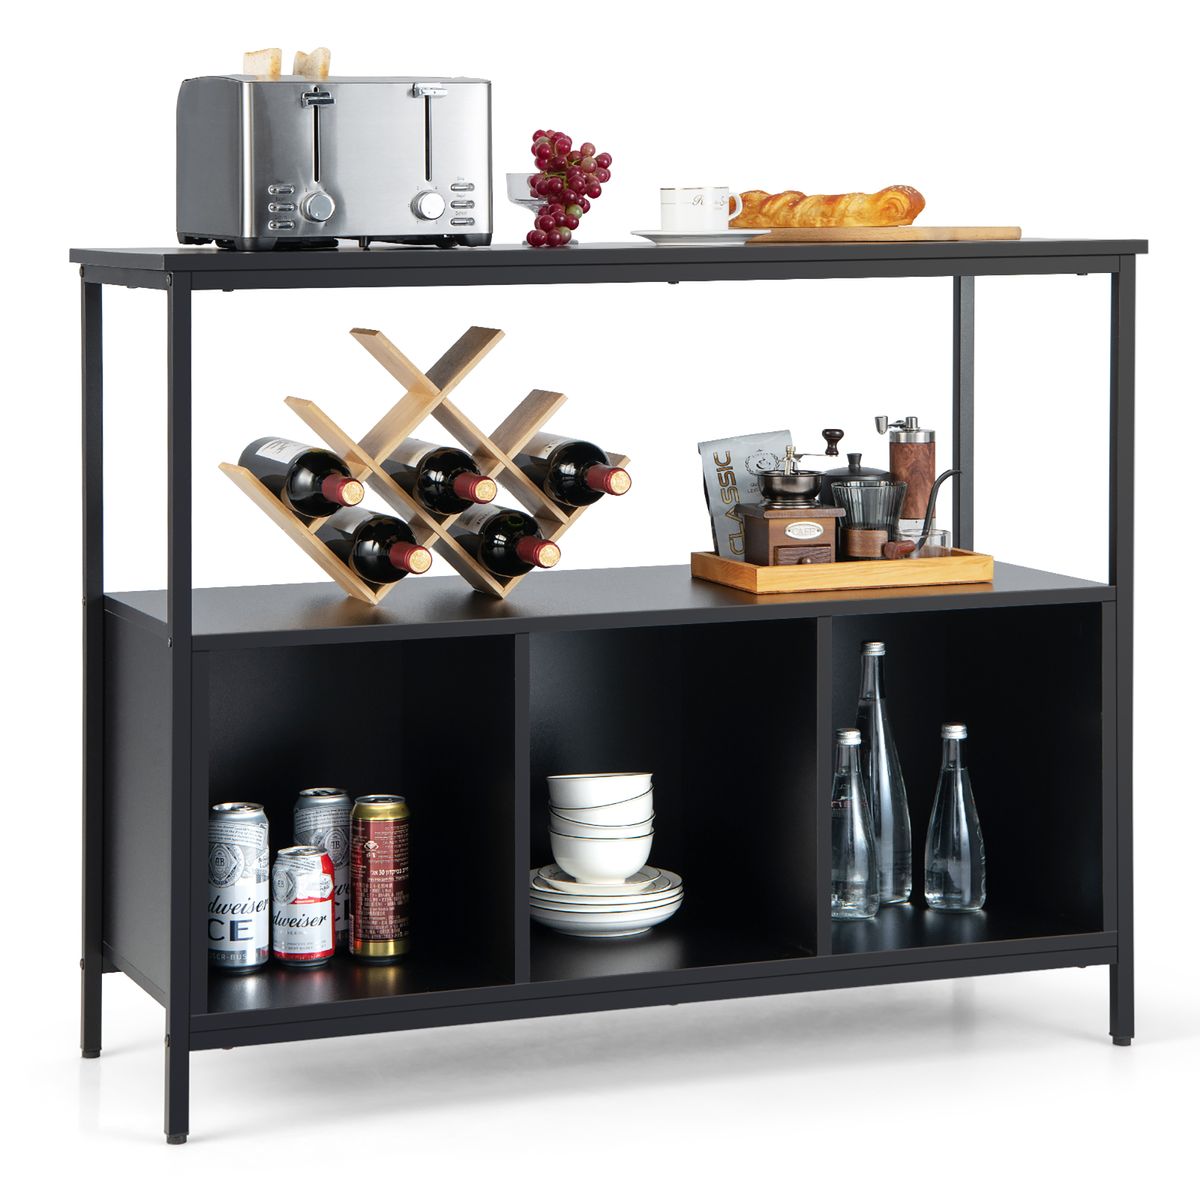 Photos - Storage Сabinet Goplus Modern Kitchen Buffet Sideboard with 3 Compartments - Buffet Sidebo